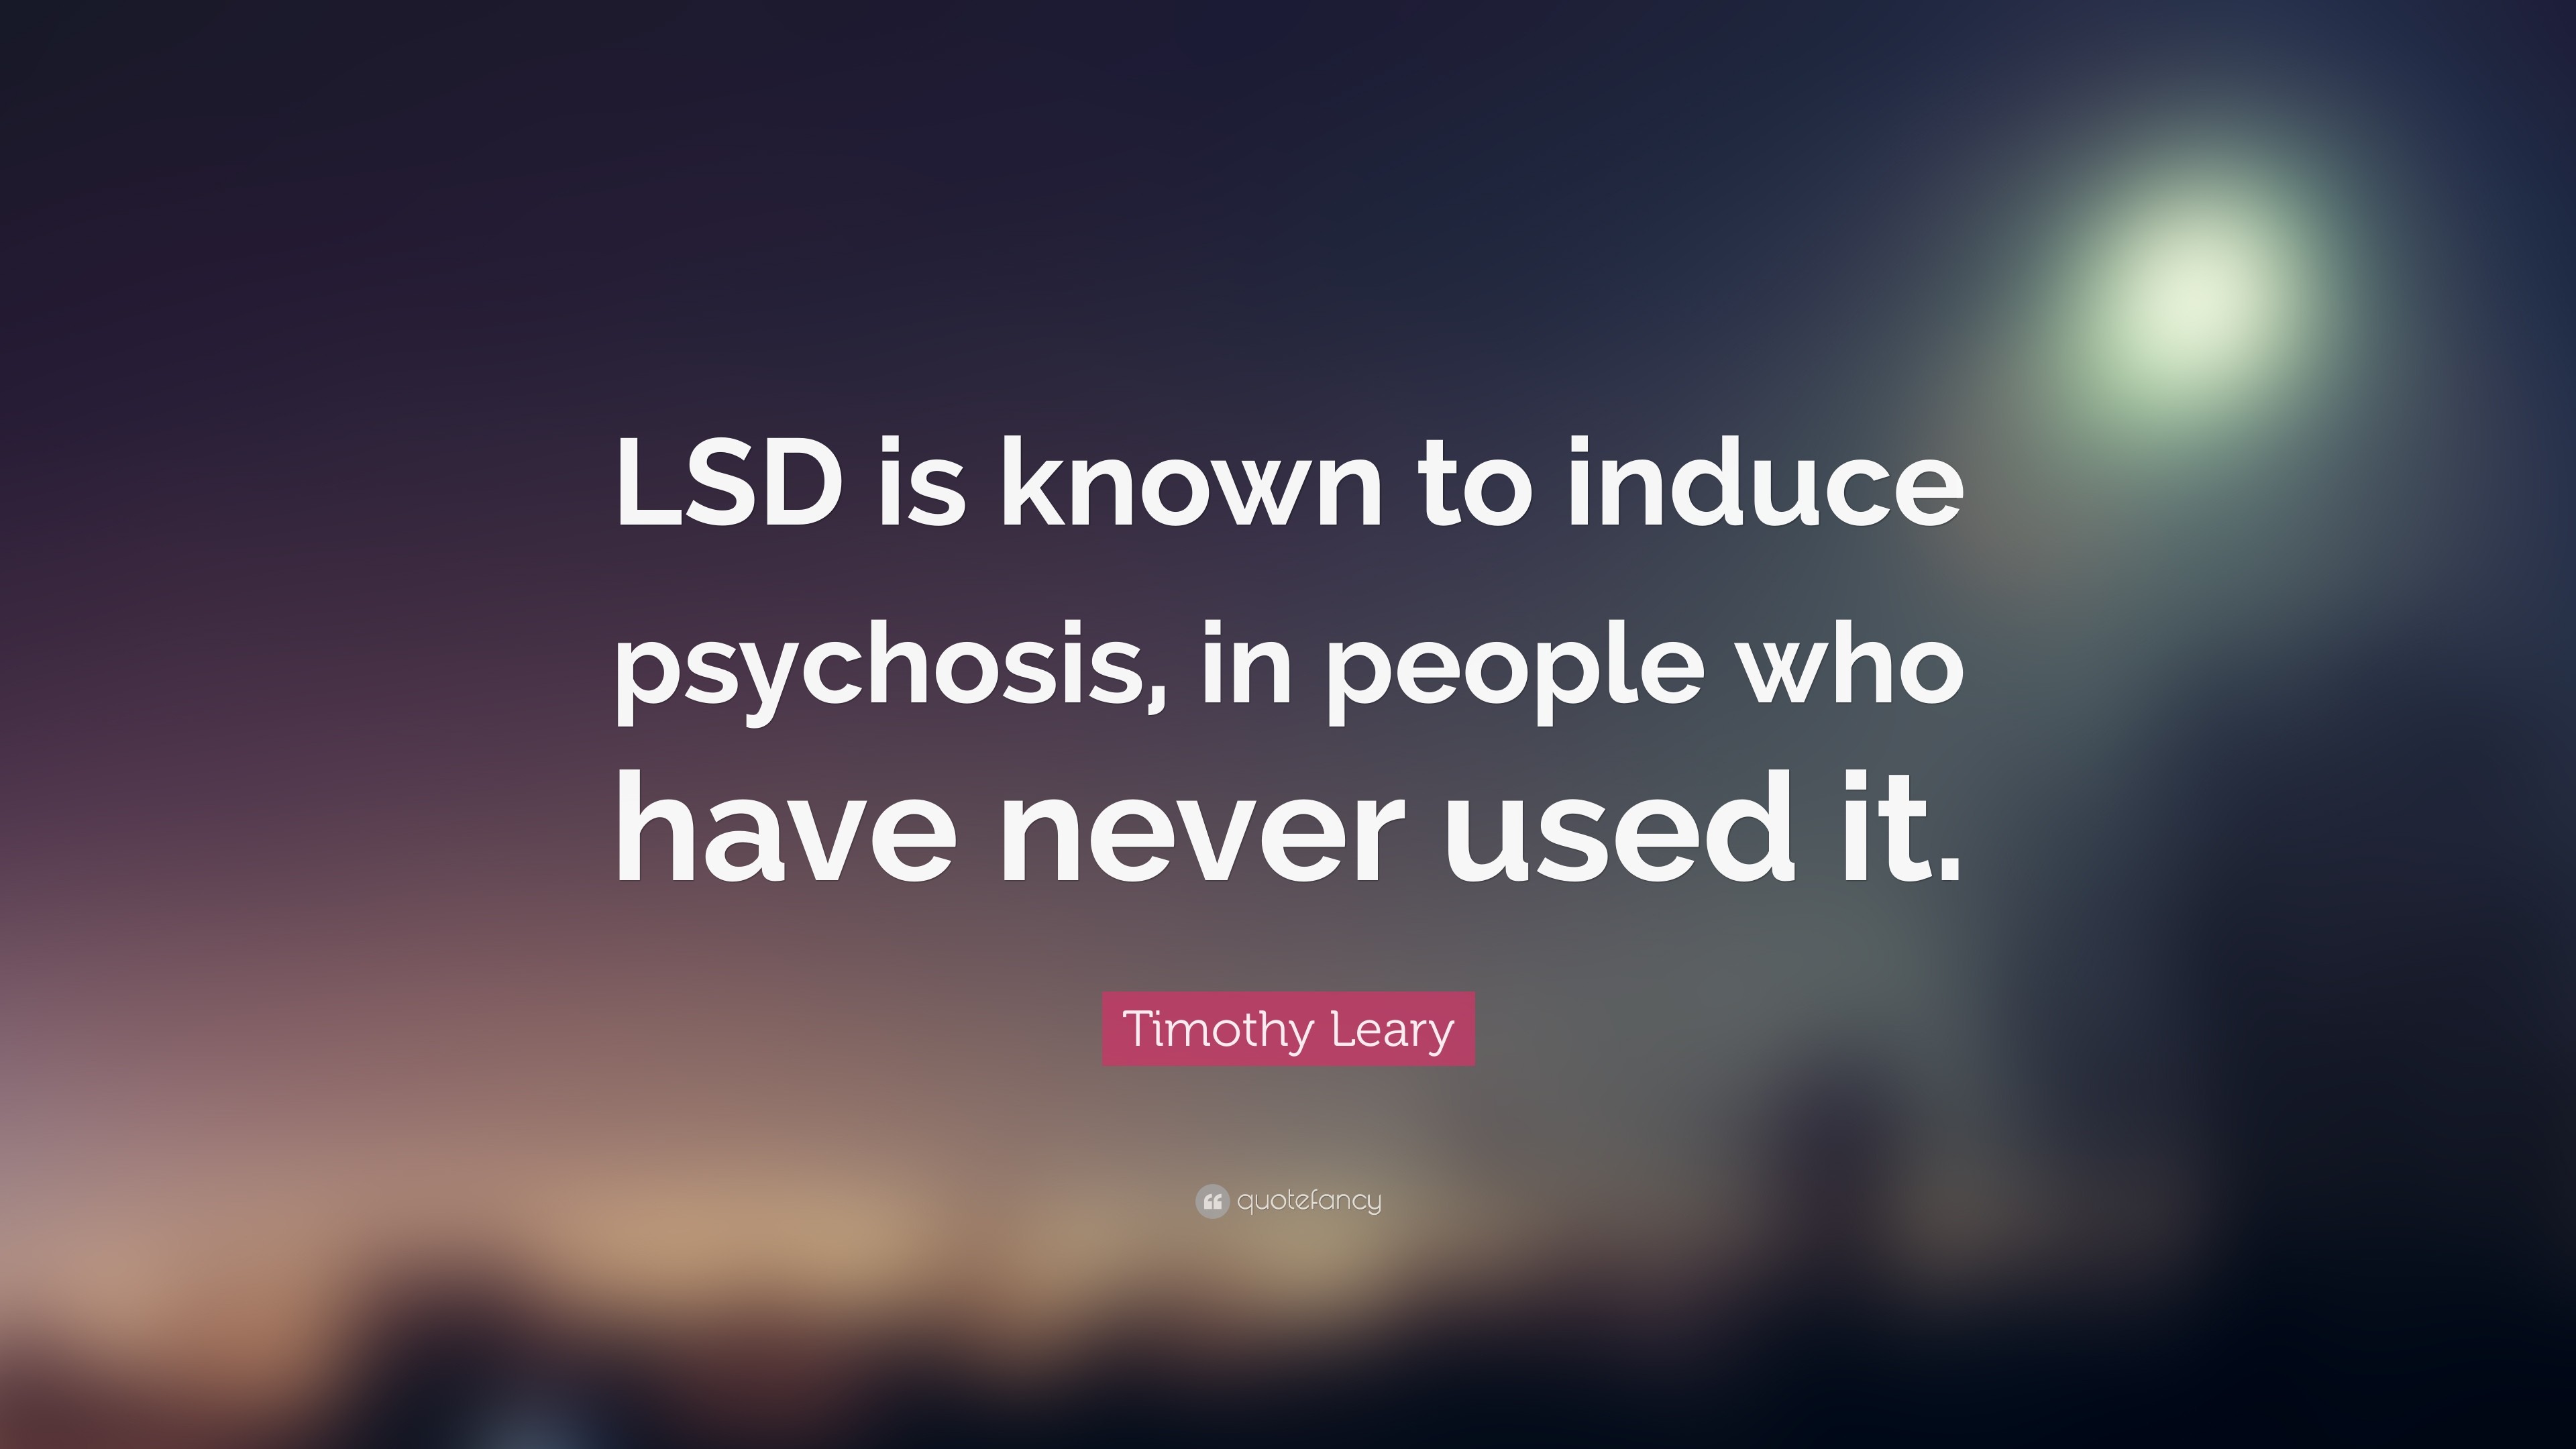 Timothy Leary Quote: “LSD is known to induce psychosis, in people who have